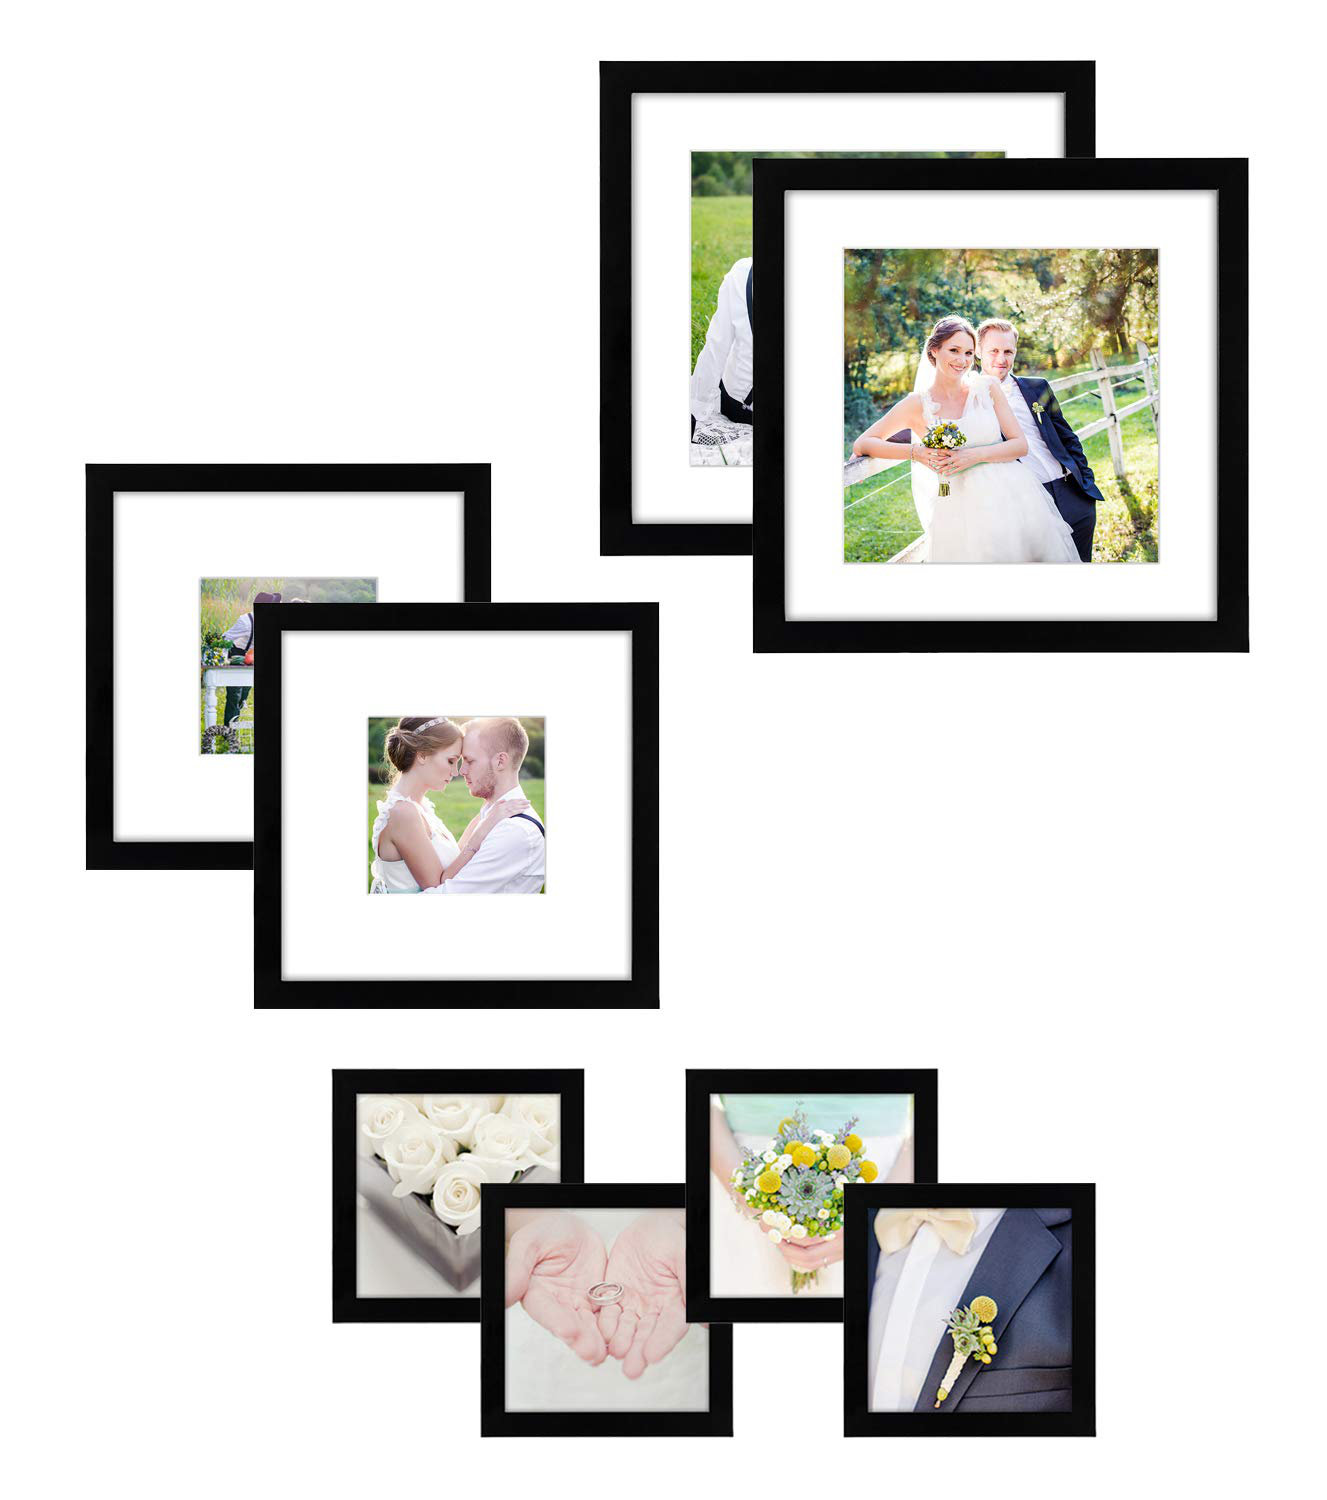 8x8 Picture Frames Black Solid Wood Display Pictures 6x6 or 4x4 with Mat or  8x8 without Mat - 8x8 Inch Square Photo Frames with 2 Mats Multi Photo